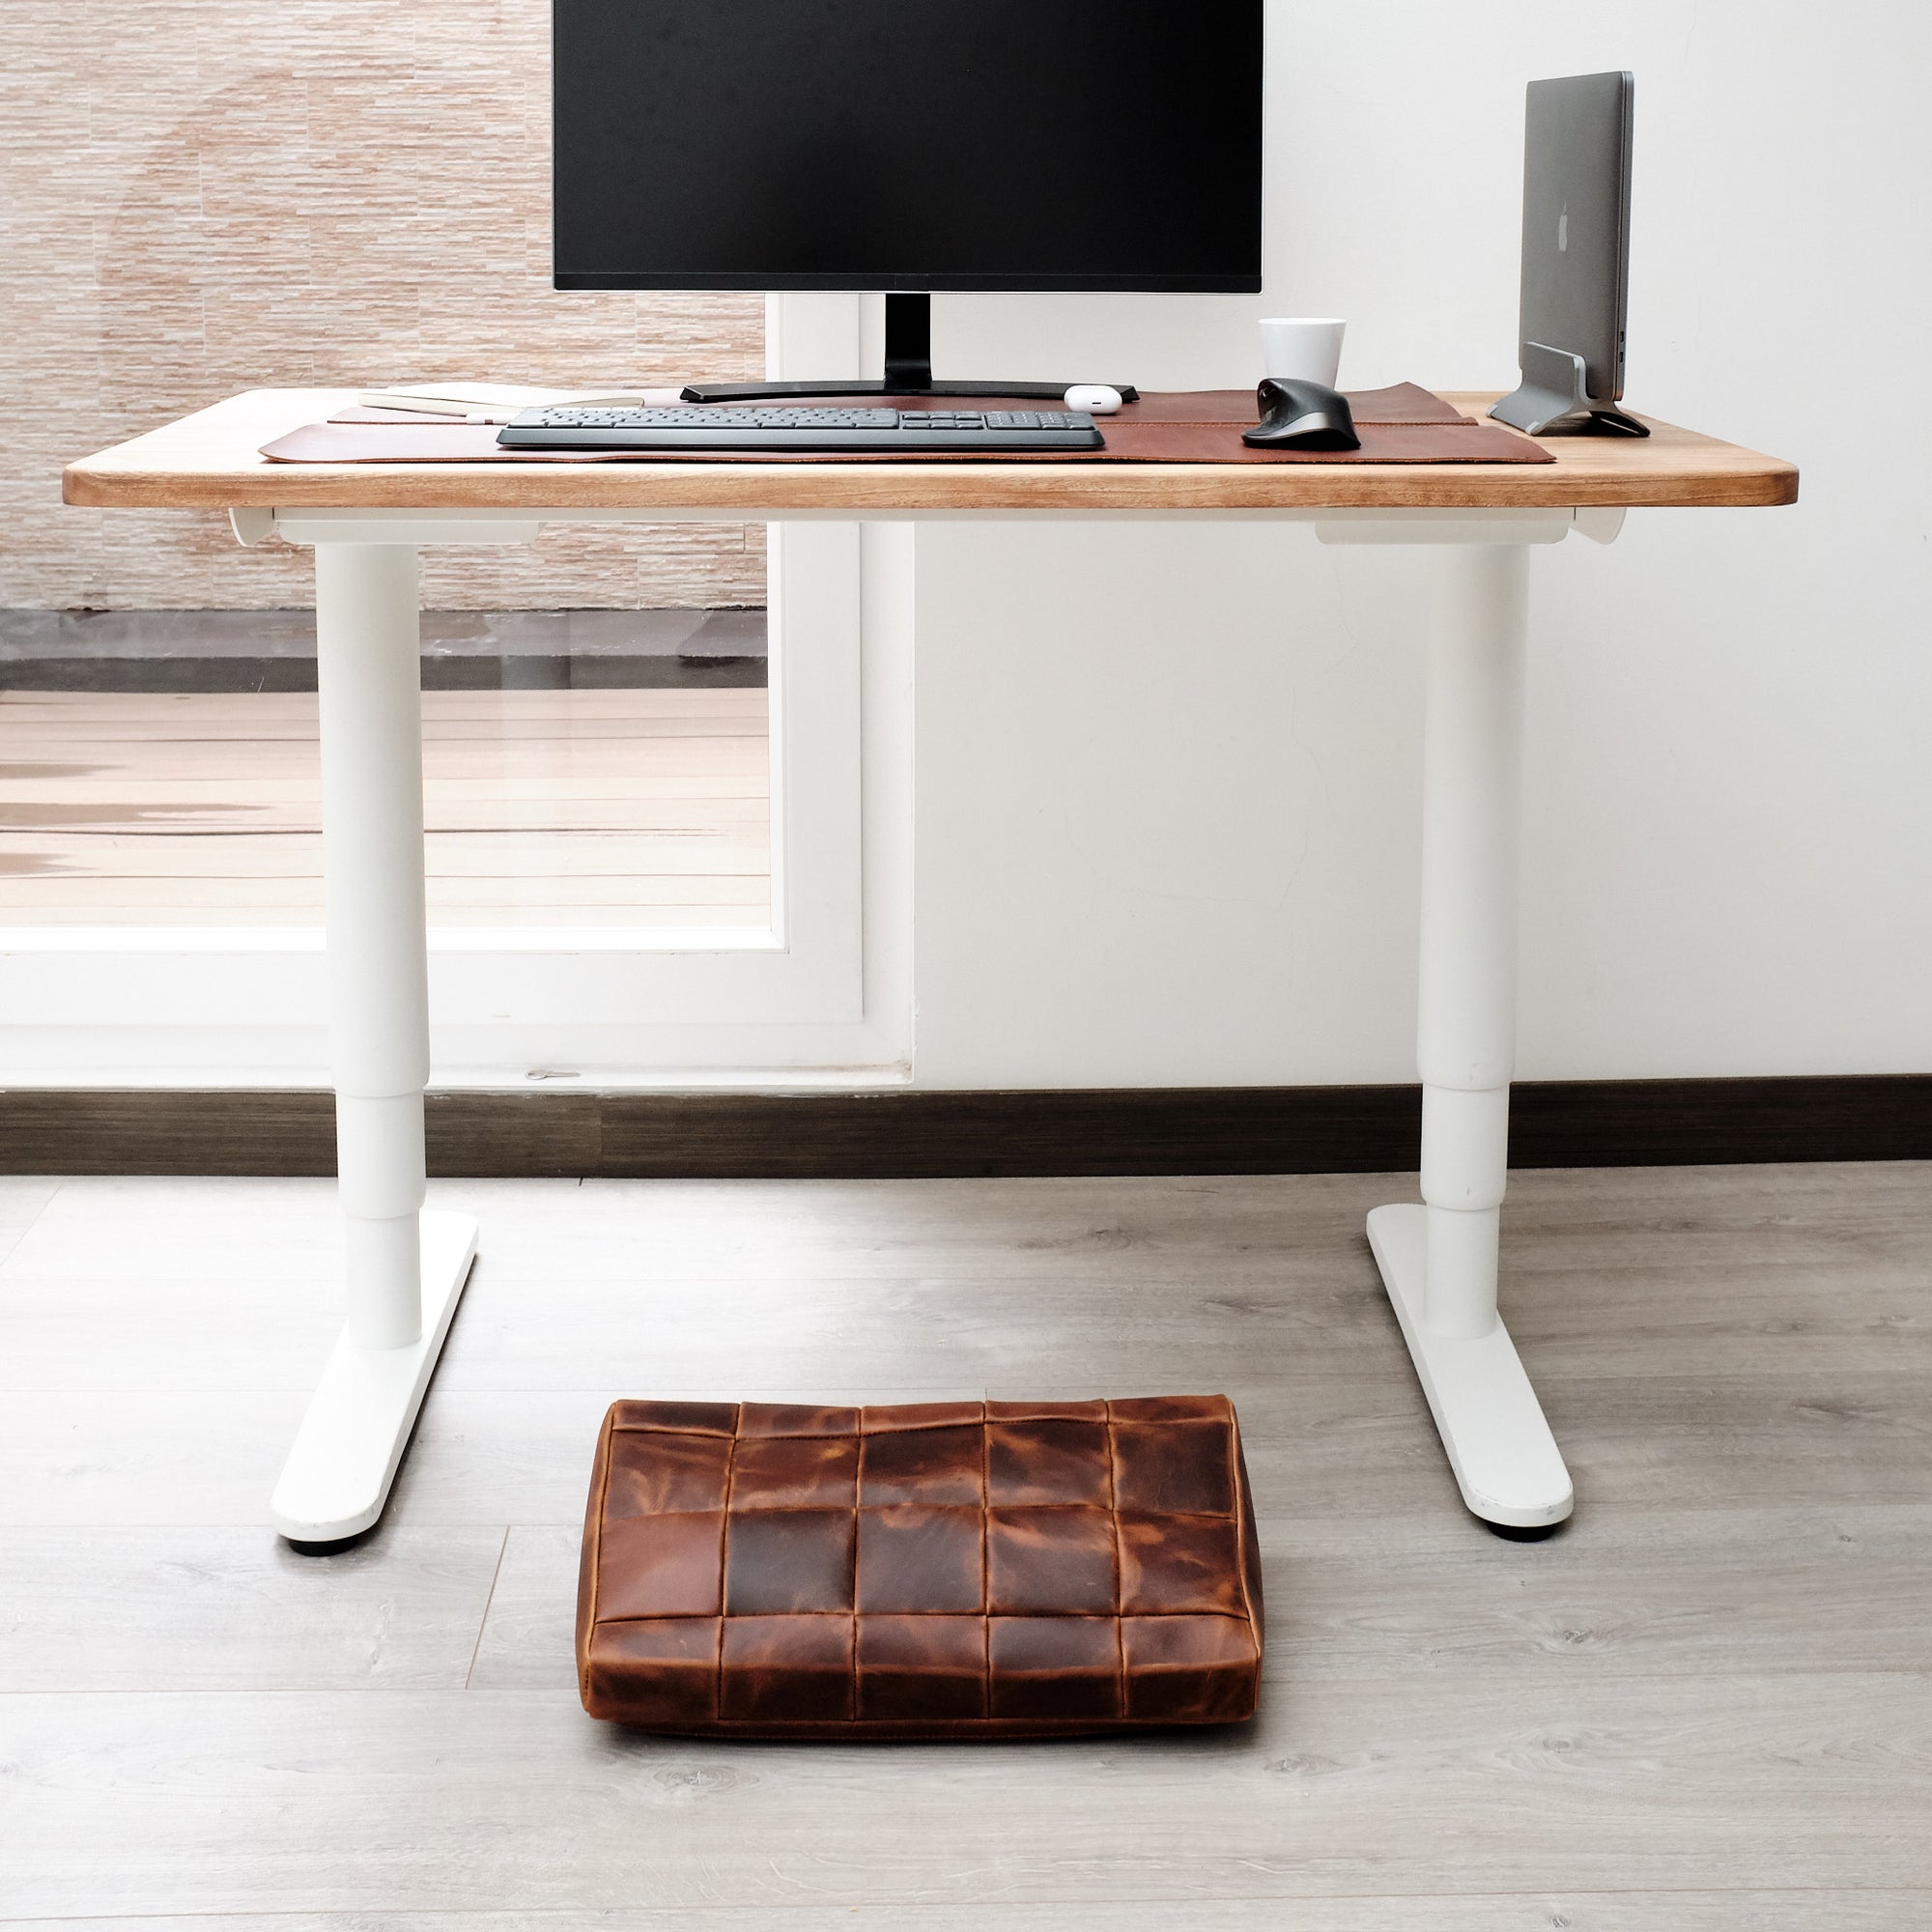 Cover. Ergonomic under desk footrest cover in distressed tan by Capra Leather